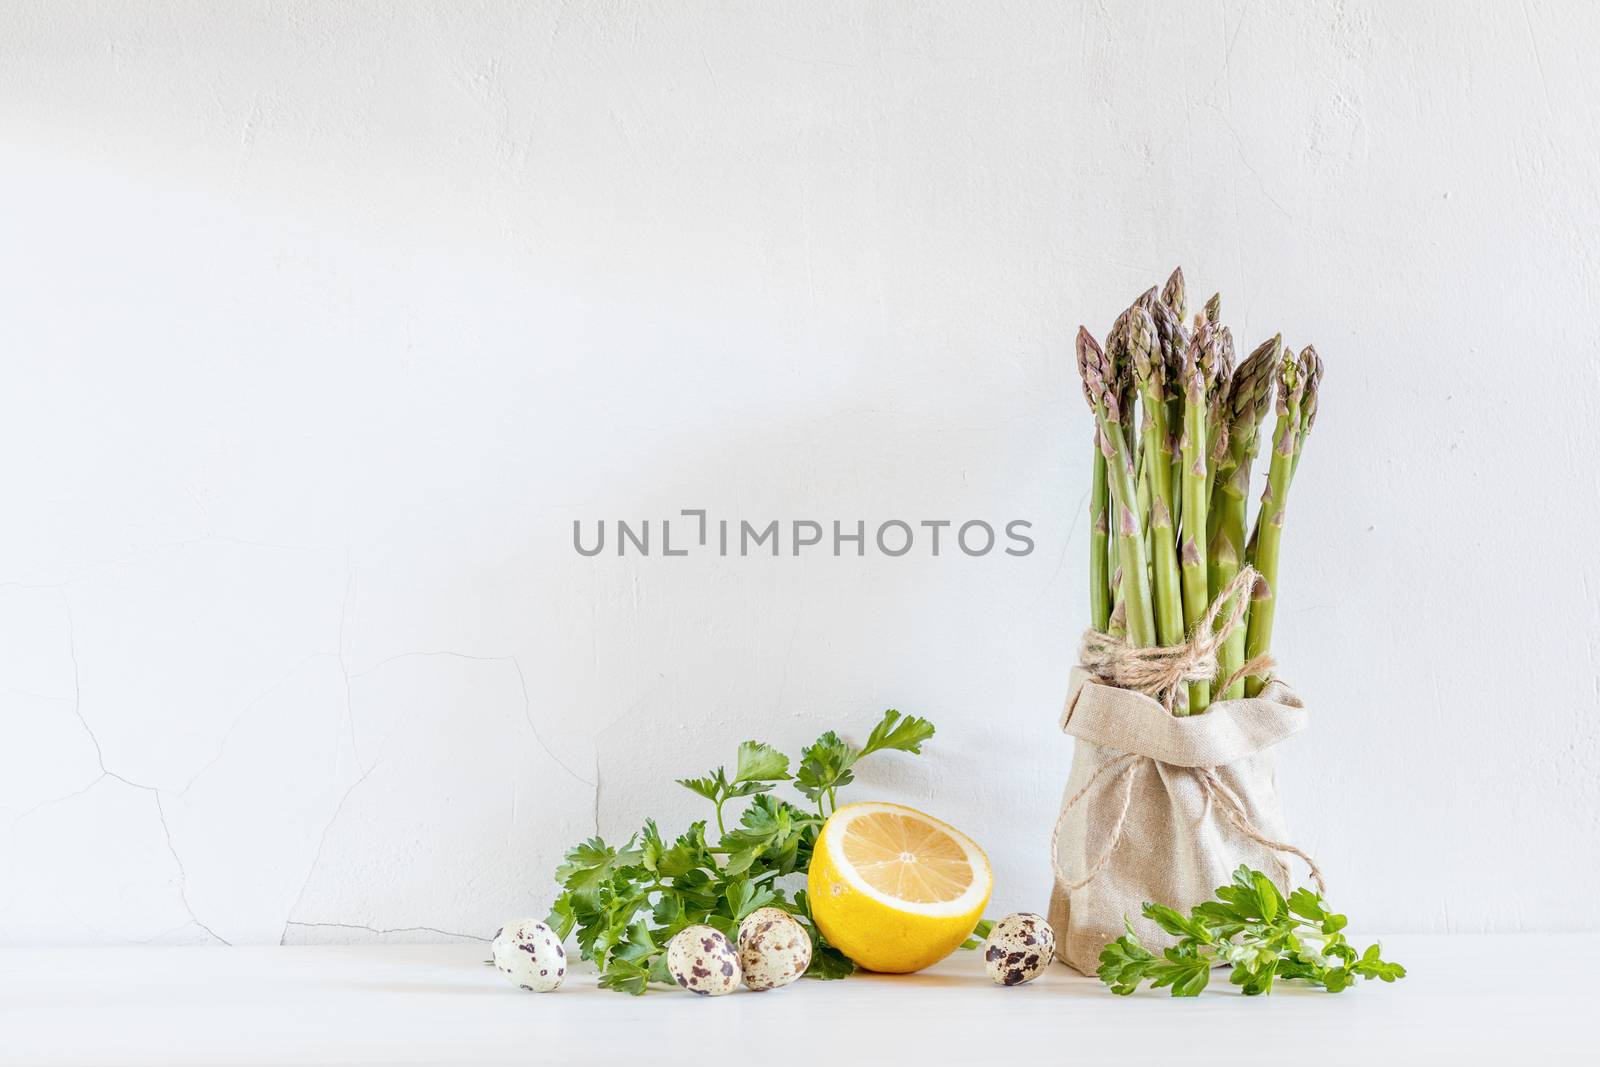 Bunches of fresh asparagus in a little sack, lemon and quail eggs on the white cracked wall background. Copy space